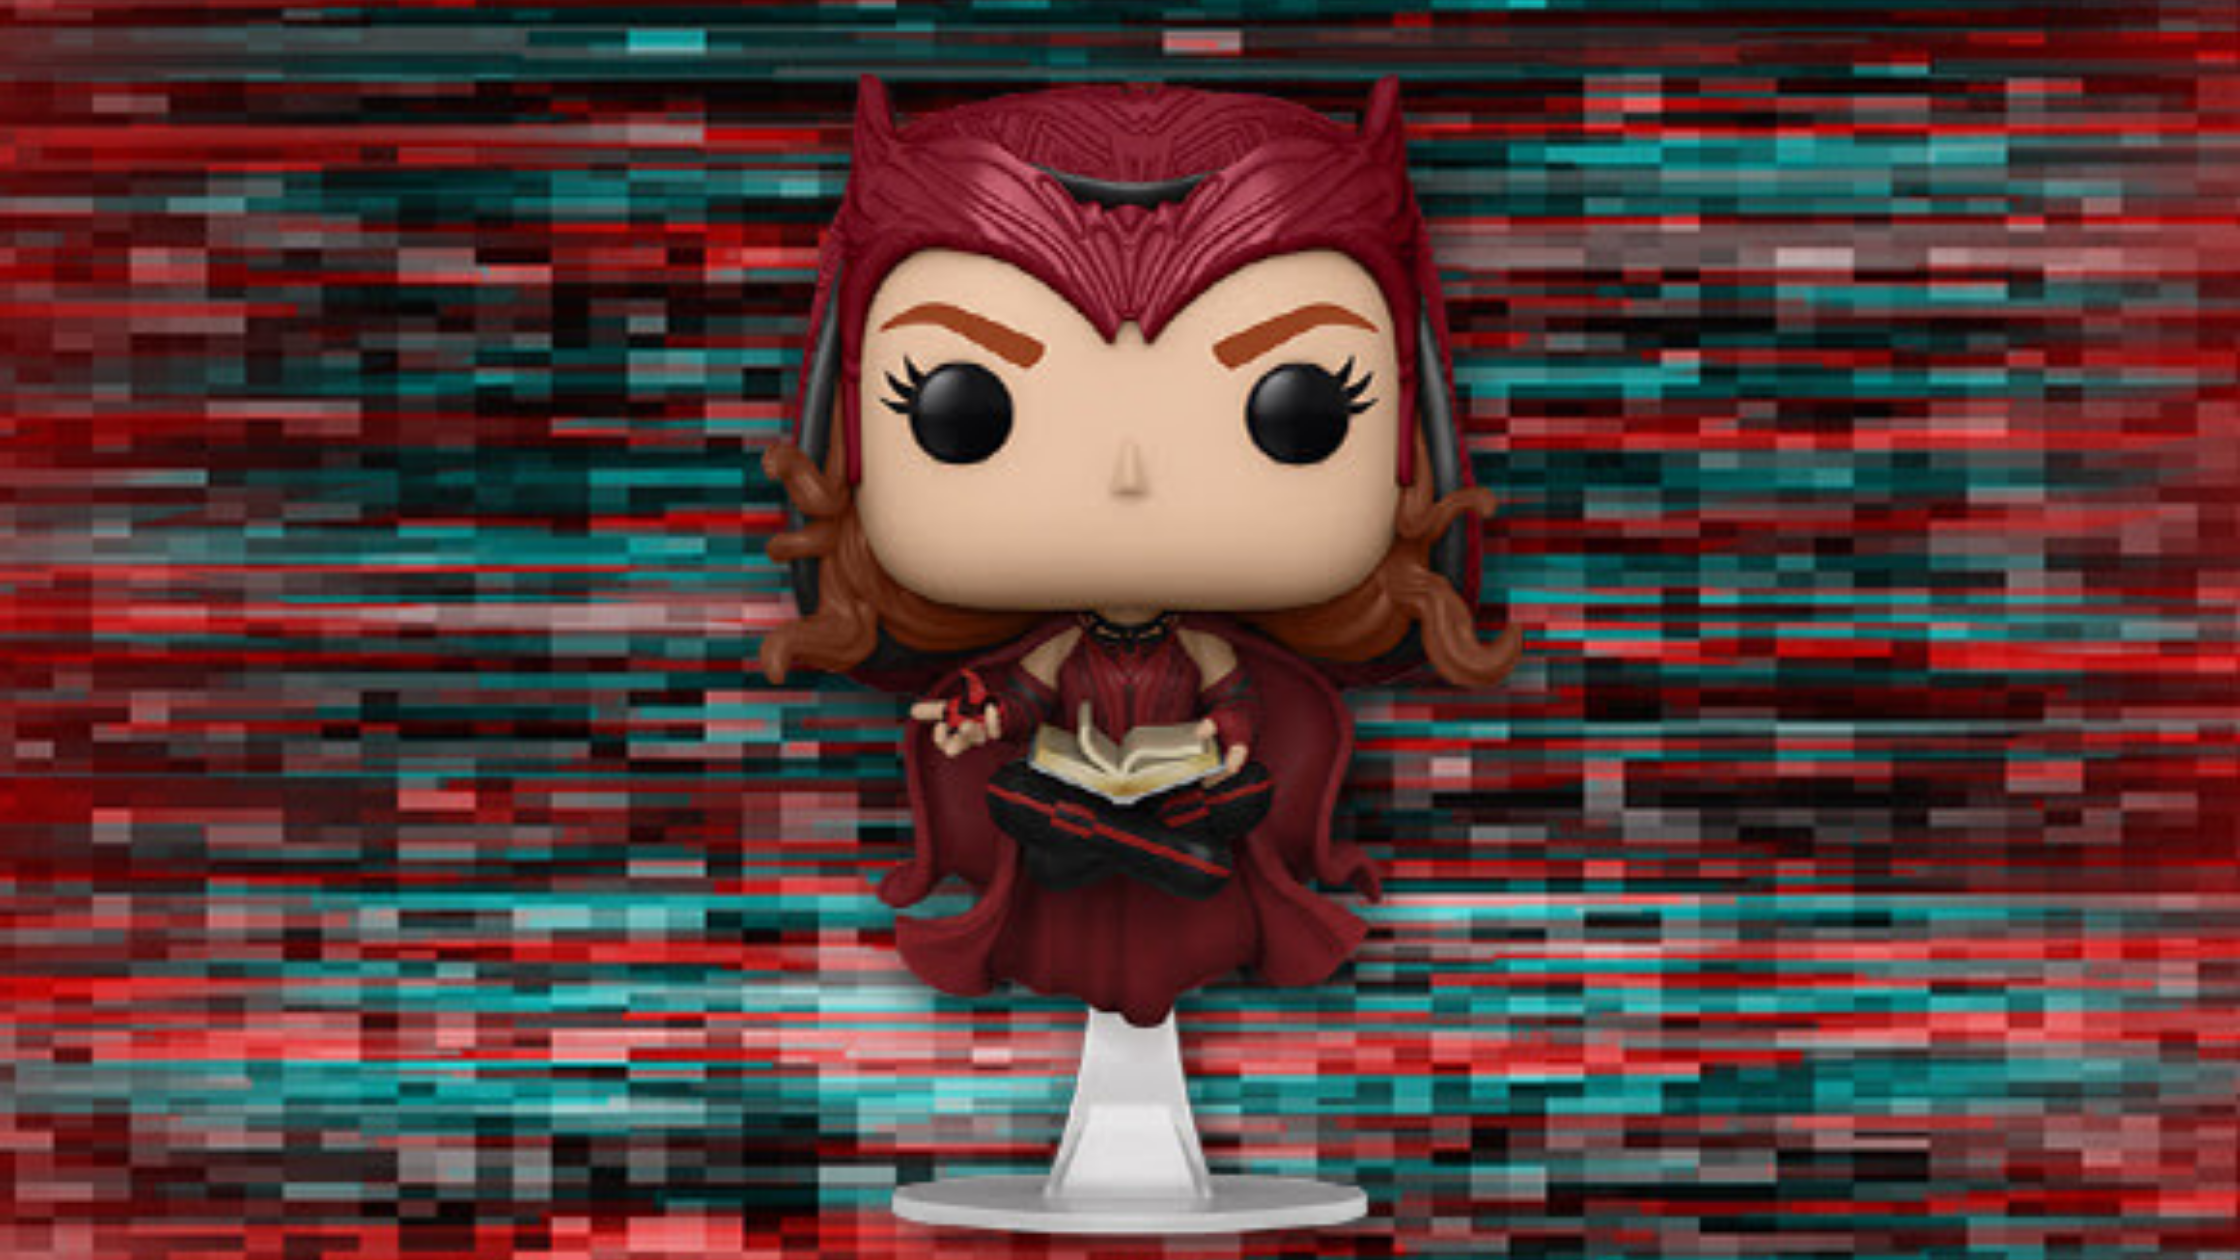 The Scarlet Witch Funko Pop Has Arrived